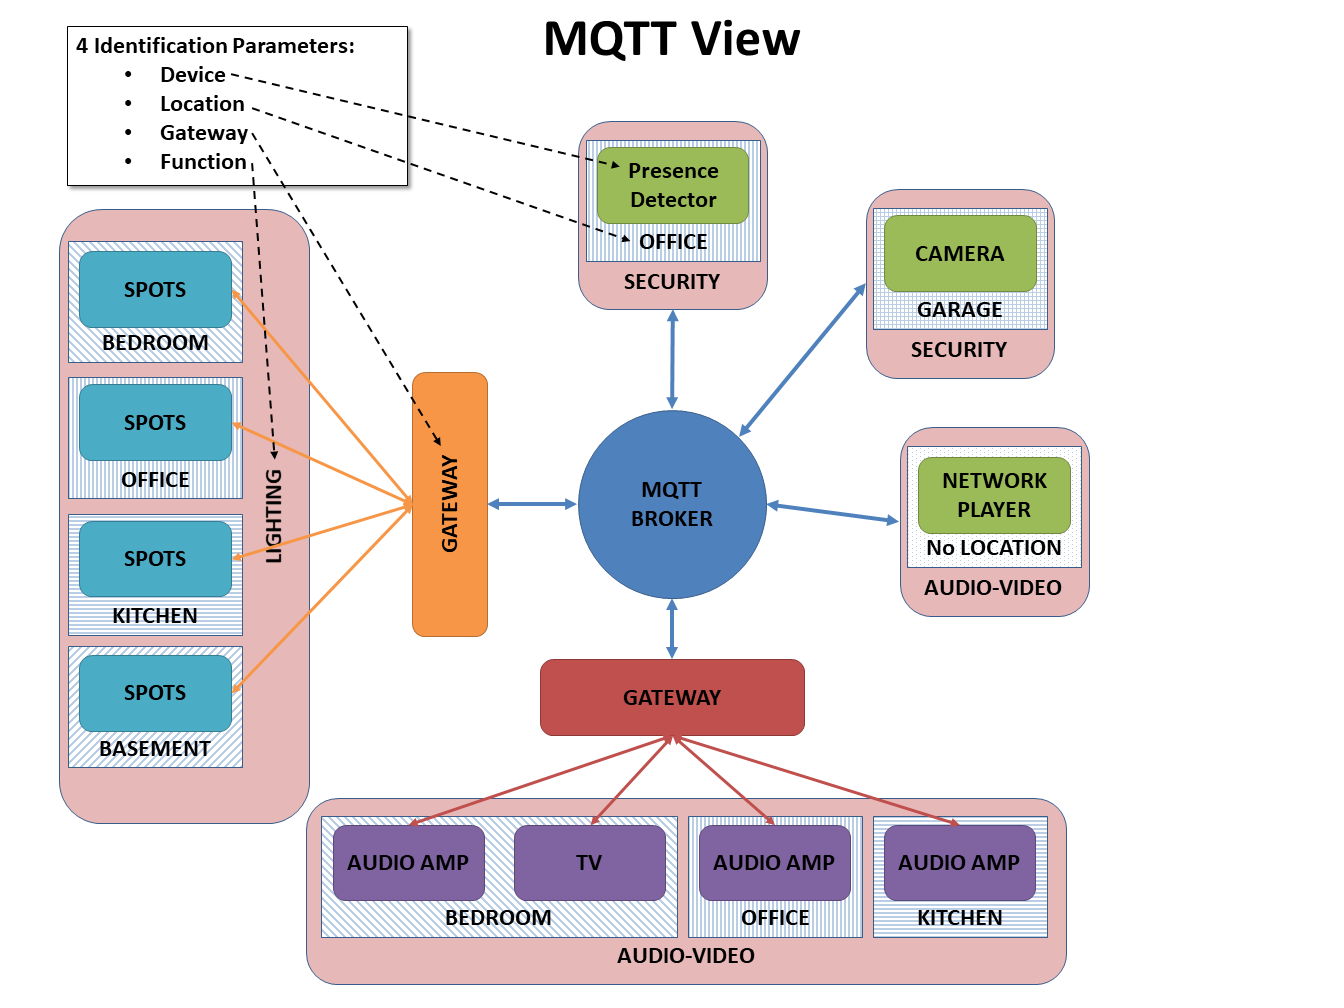 Diagram of a smart home from the MQTT network point of view